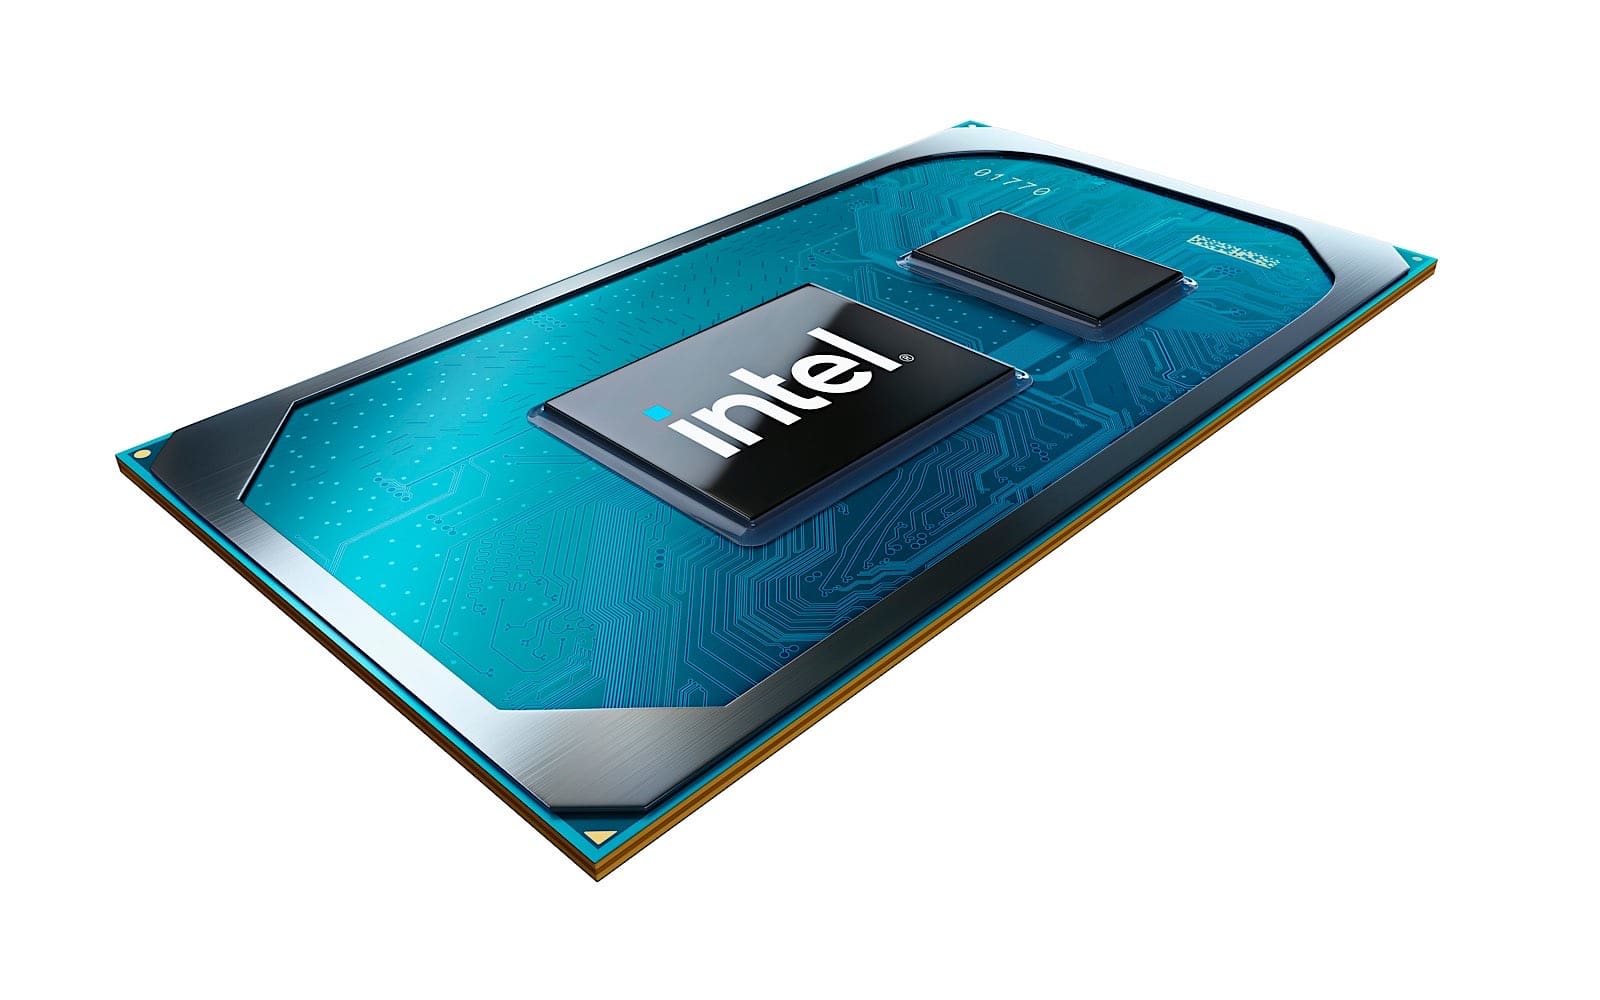 Intel's 11th gen hardware launched at Computex 2021